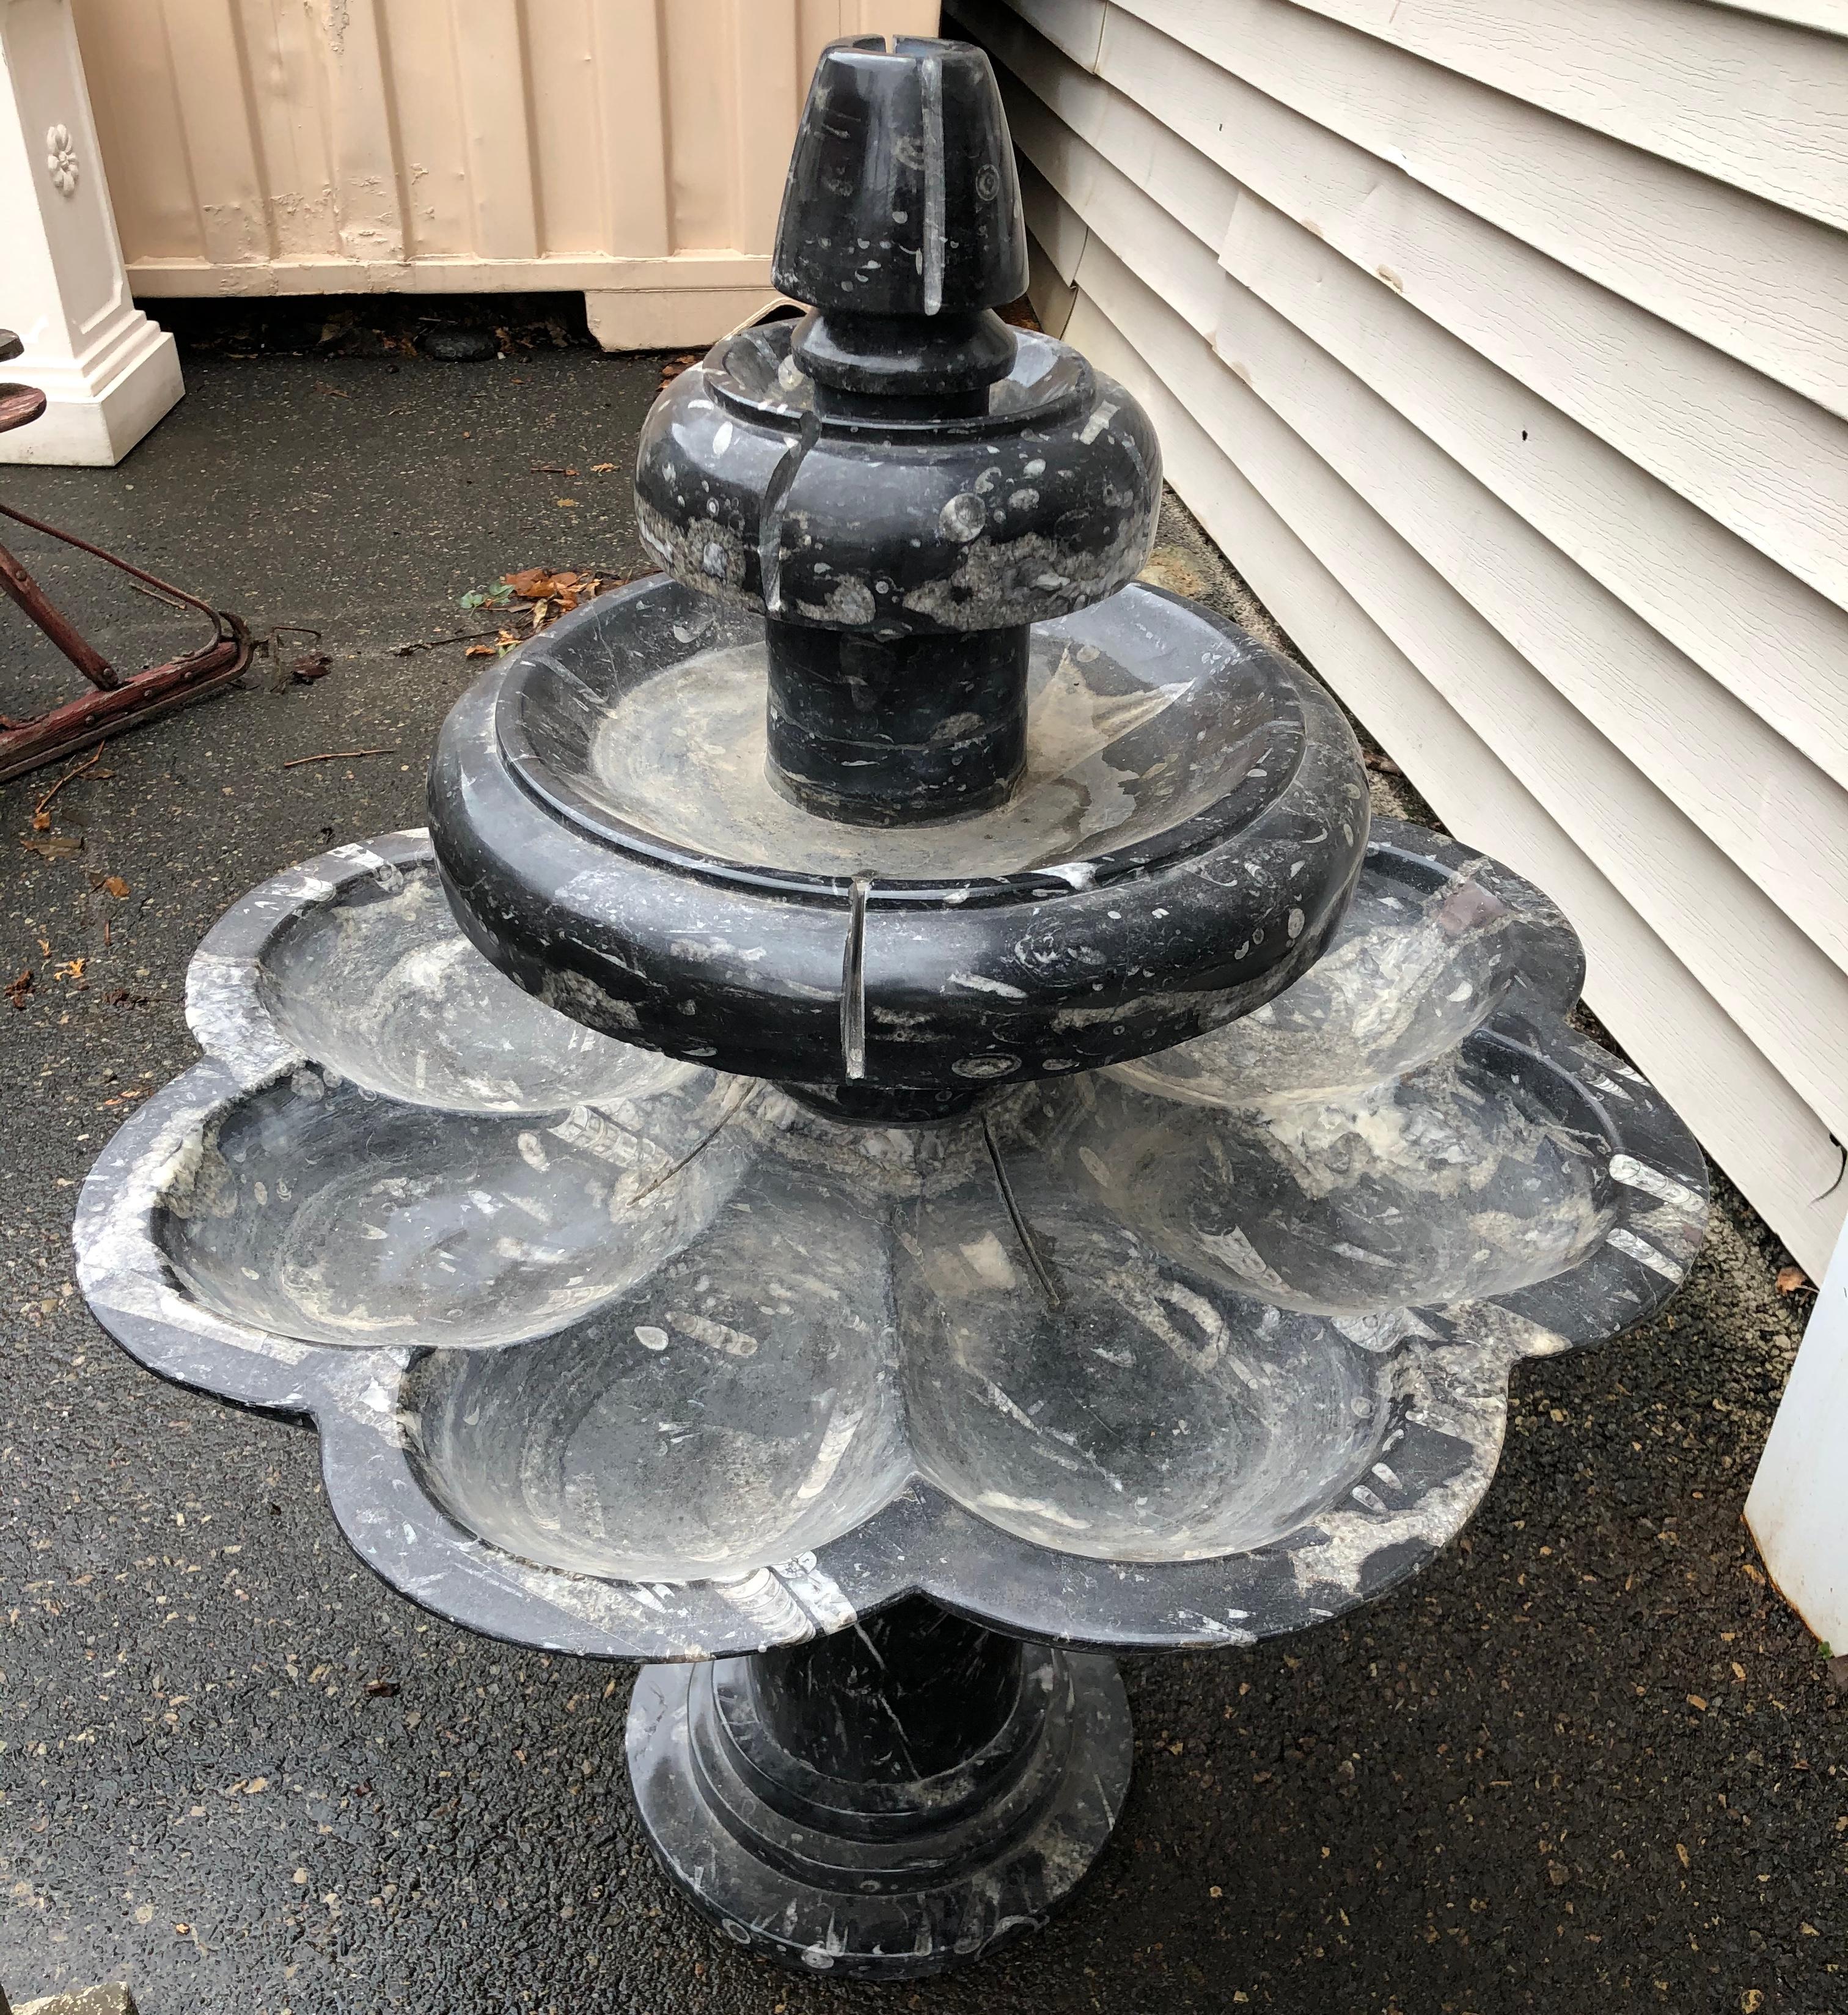 Add timeless beauty to your indoor or outdoor space with this 3-tier all marble Fountain. The fountain is carved from solid blocks of pure Gray marble. The fountain needs water pump installed.

Dimensions: 42